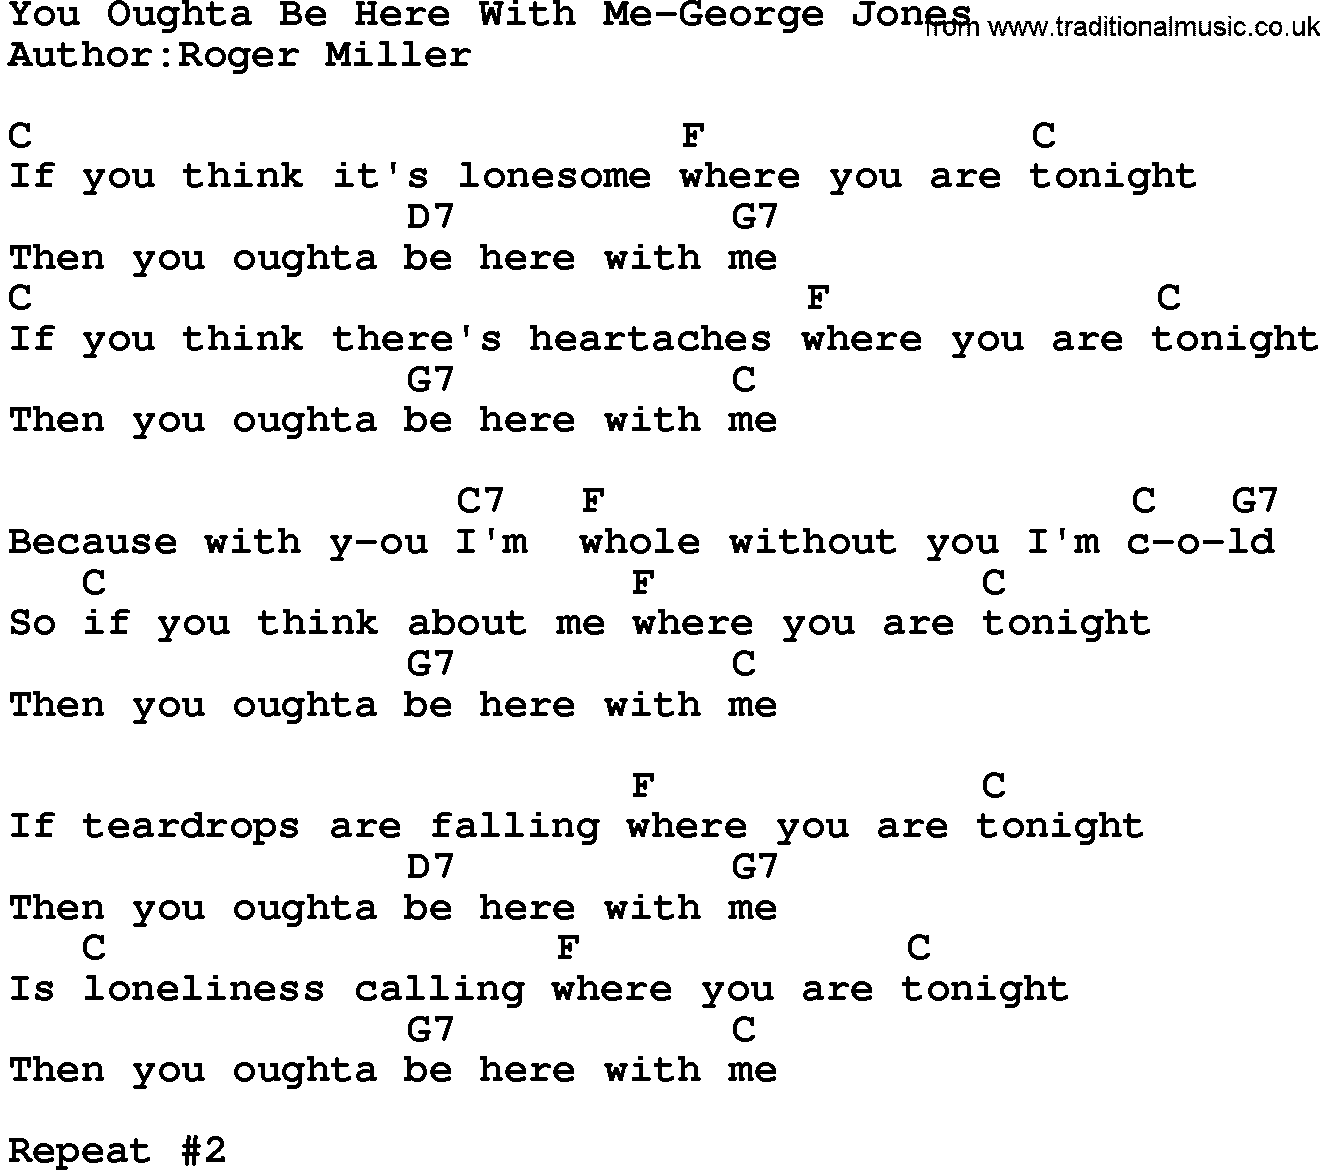 Country music song: You Oughta Be Here With Me-George Jones lyrics and chords